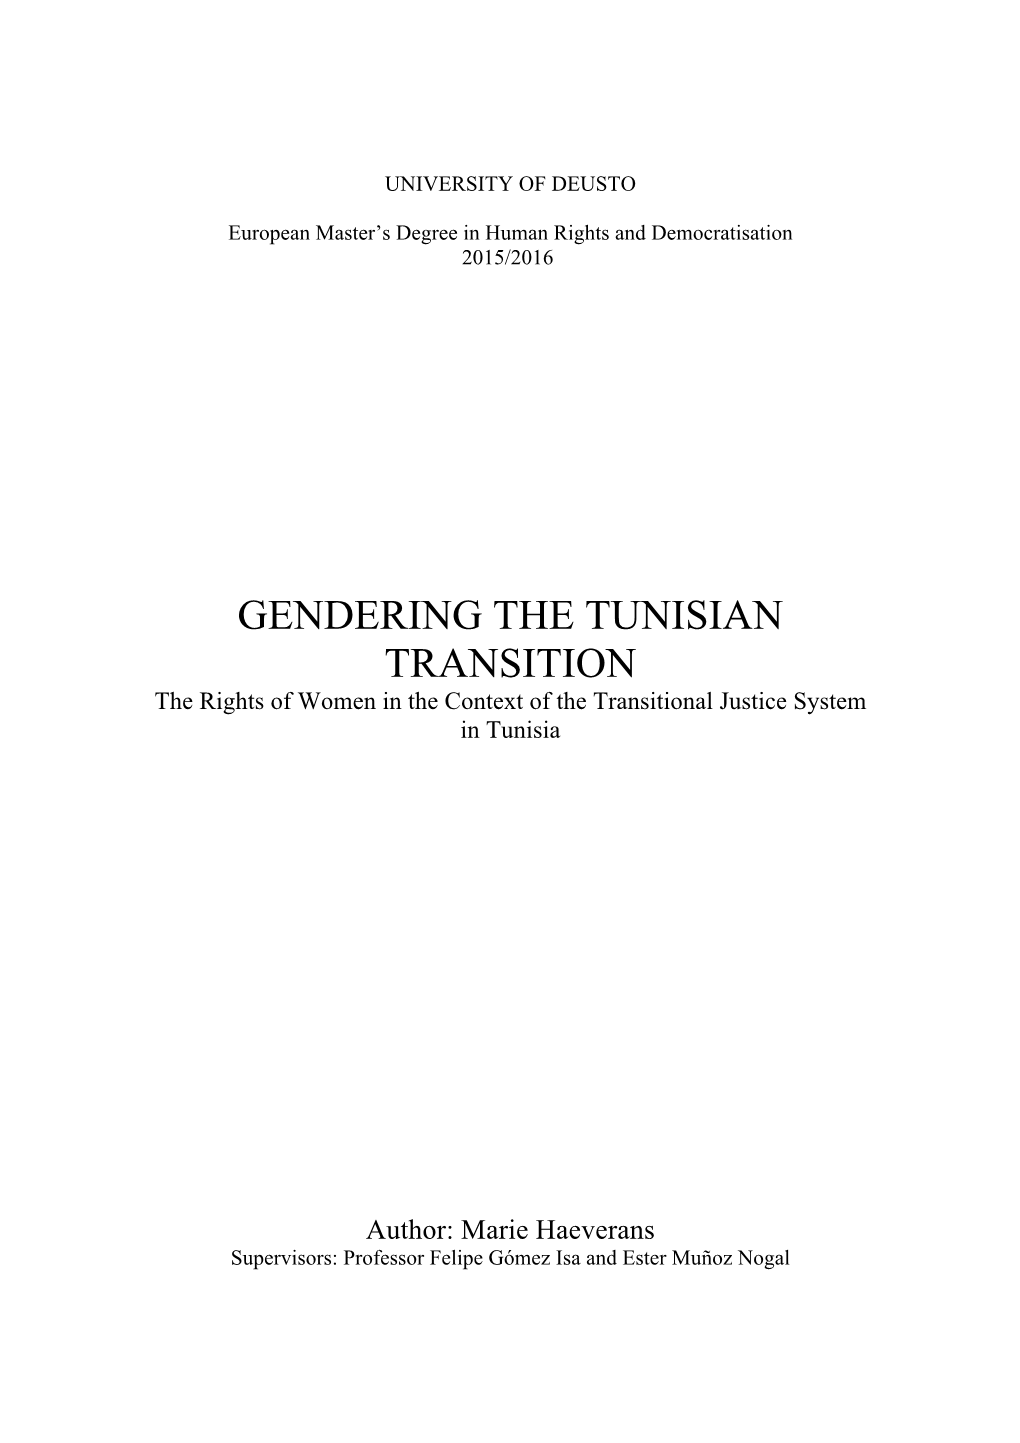 GENDERING the TUNISIAN TRANSITION the Rights of Women in the Context of the Transitional Justice System in Tunisia